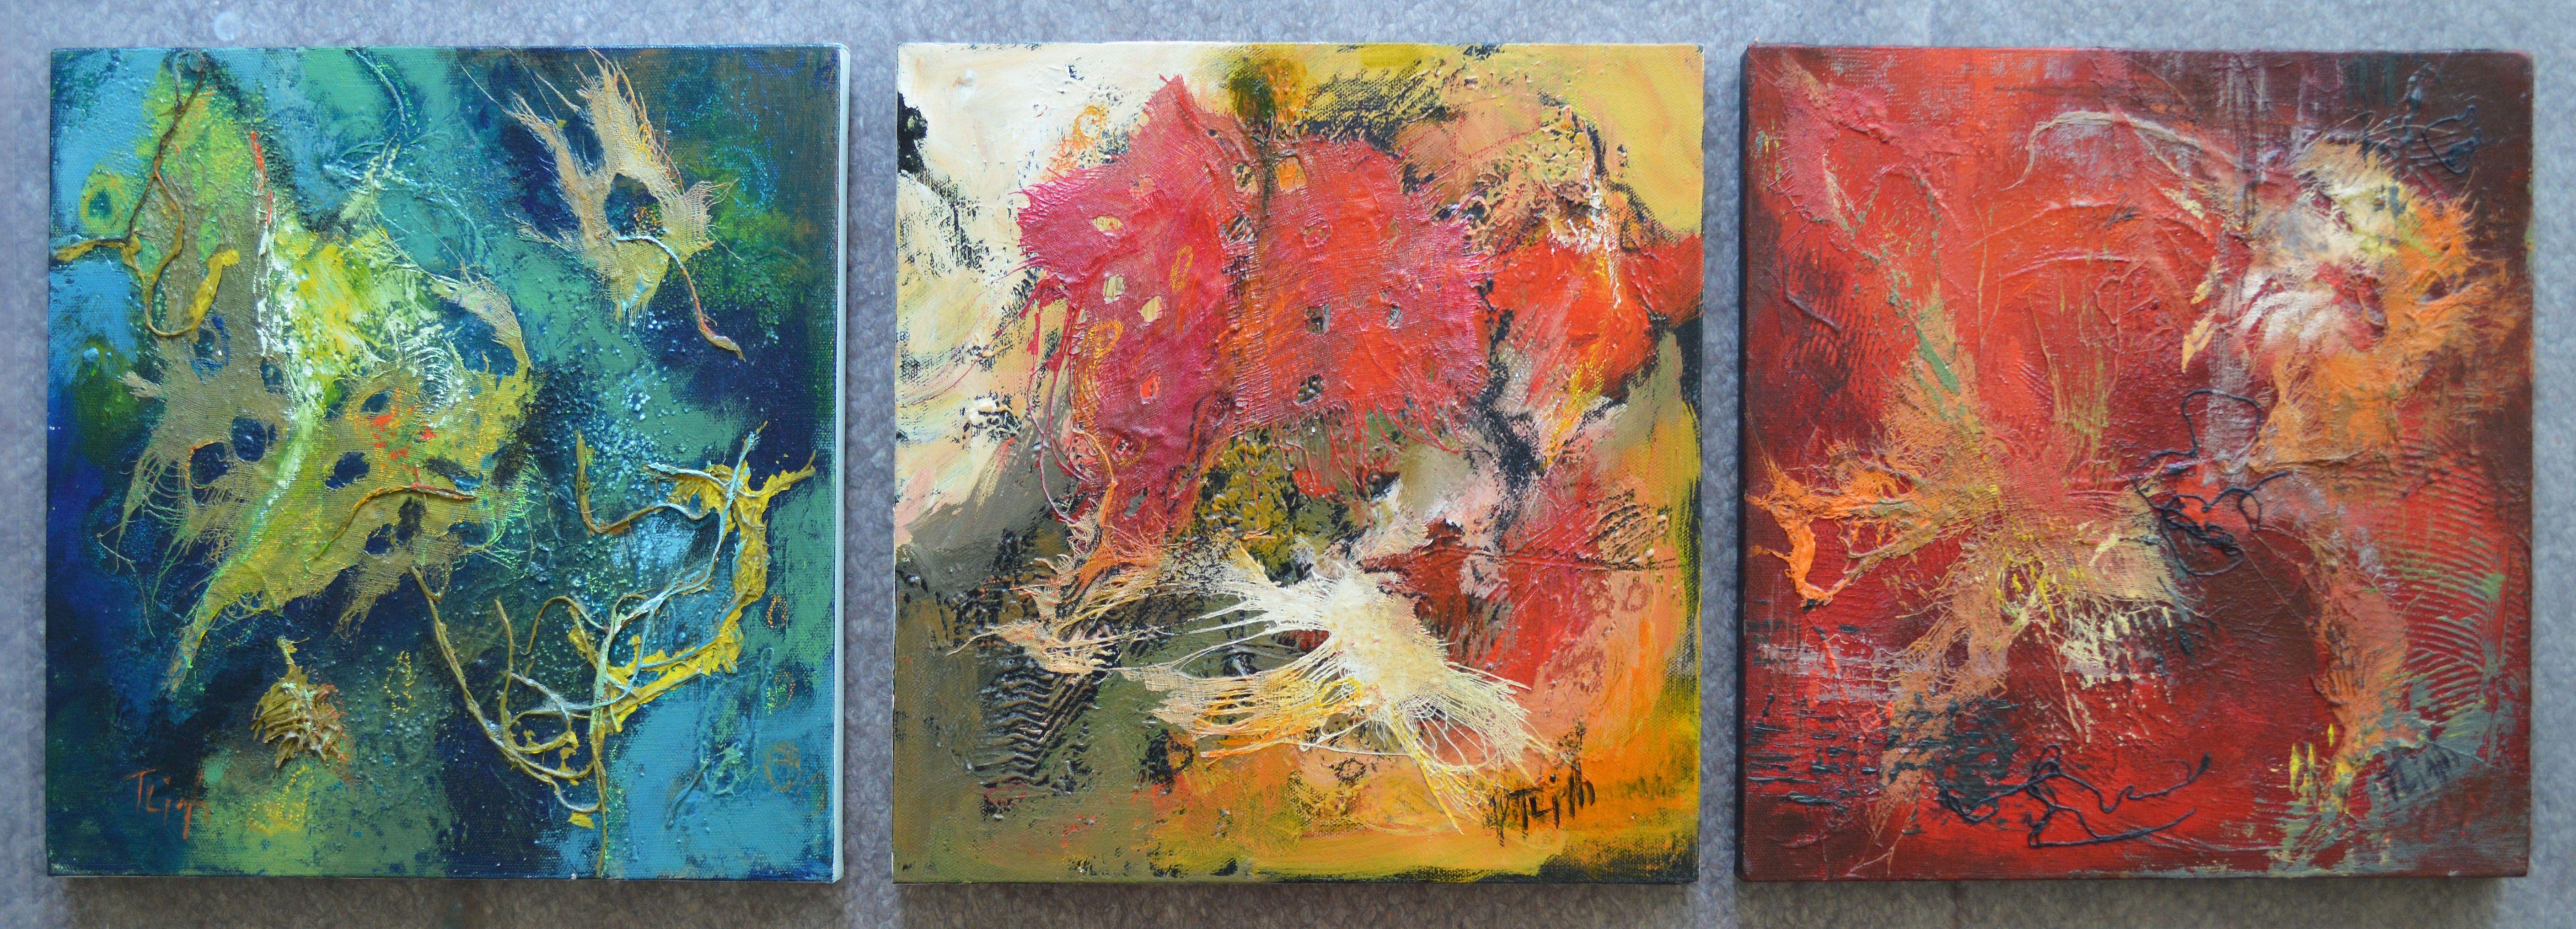 Maples in Hot Sauce, Painting, Acrylic on Wood Panel For Sale 2